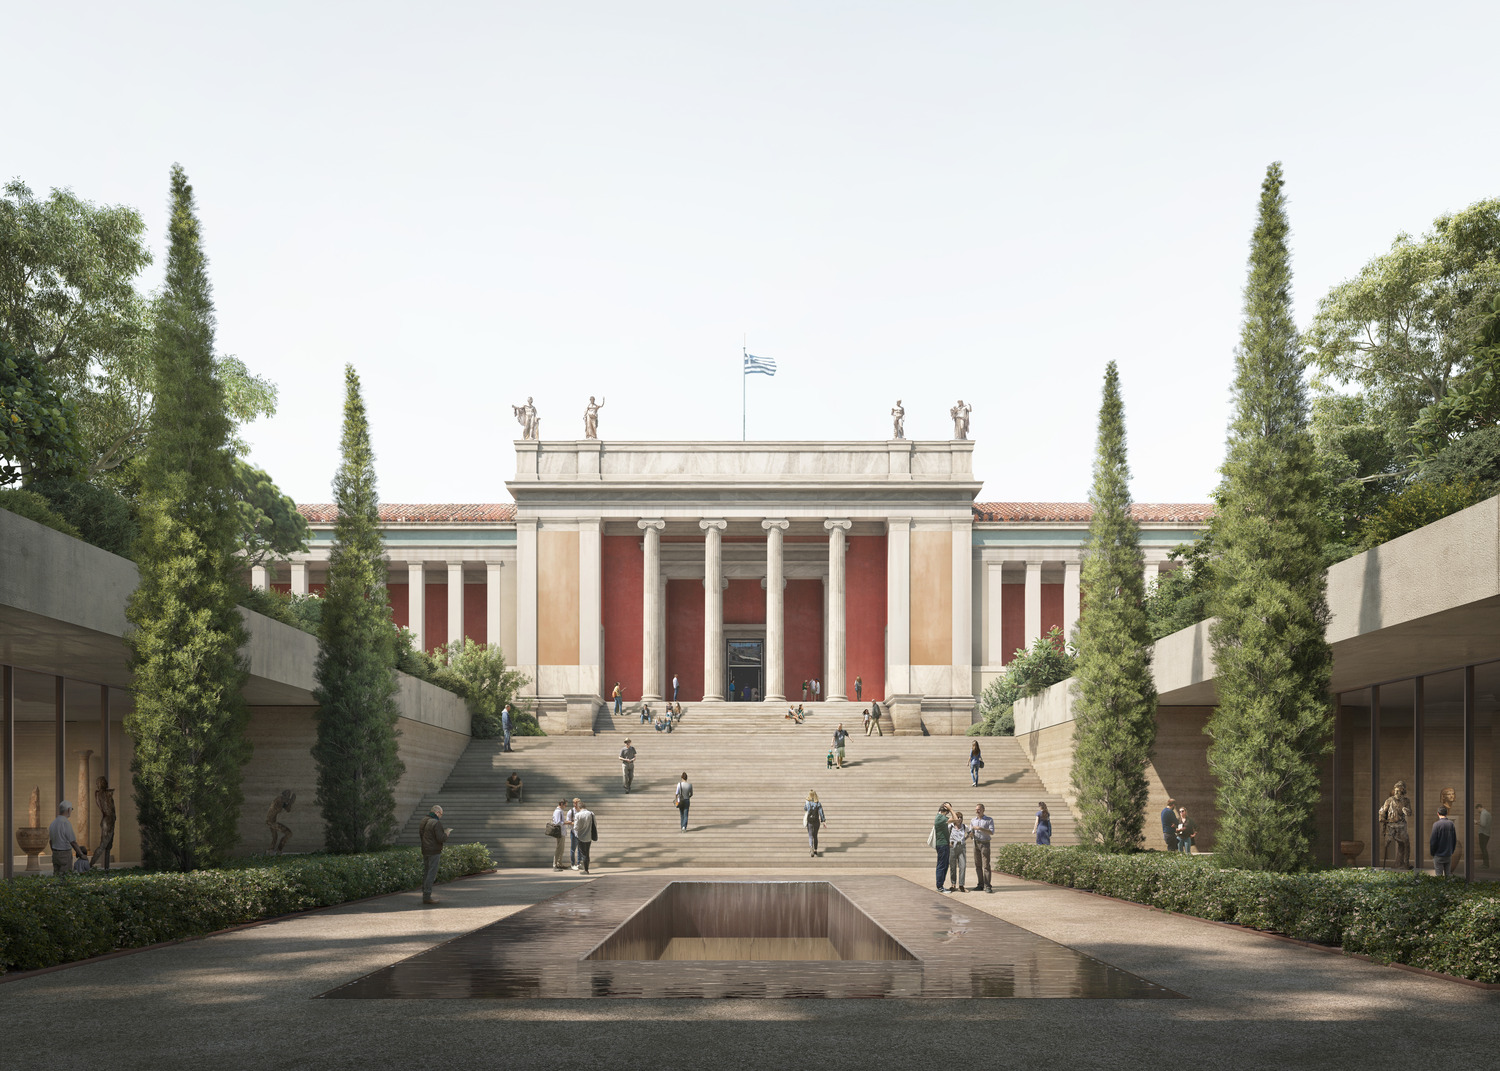 Archisearch David Chipperfield Architects Berlin's winning proposal for the National Archaeological Museum in Athens